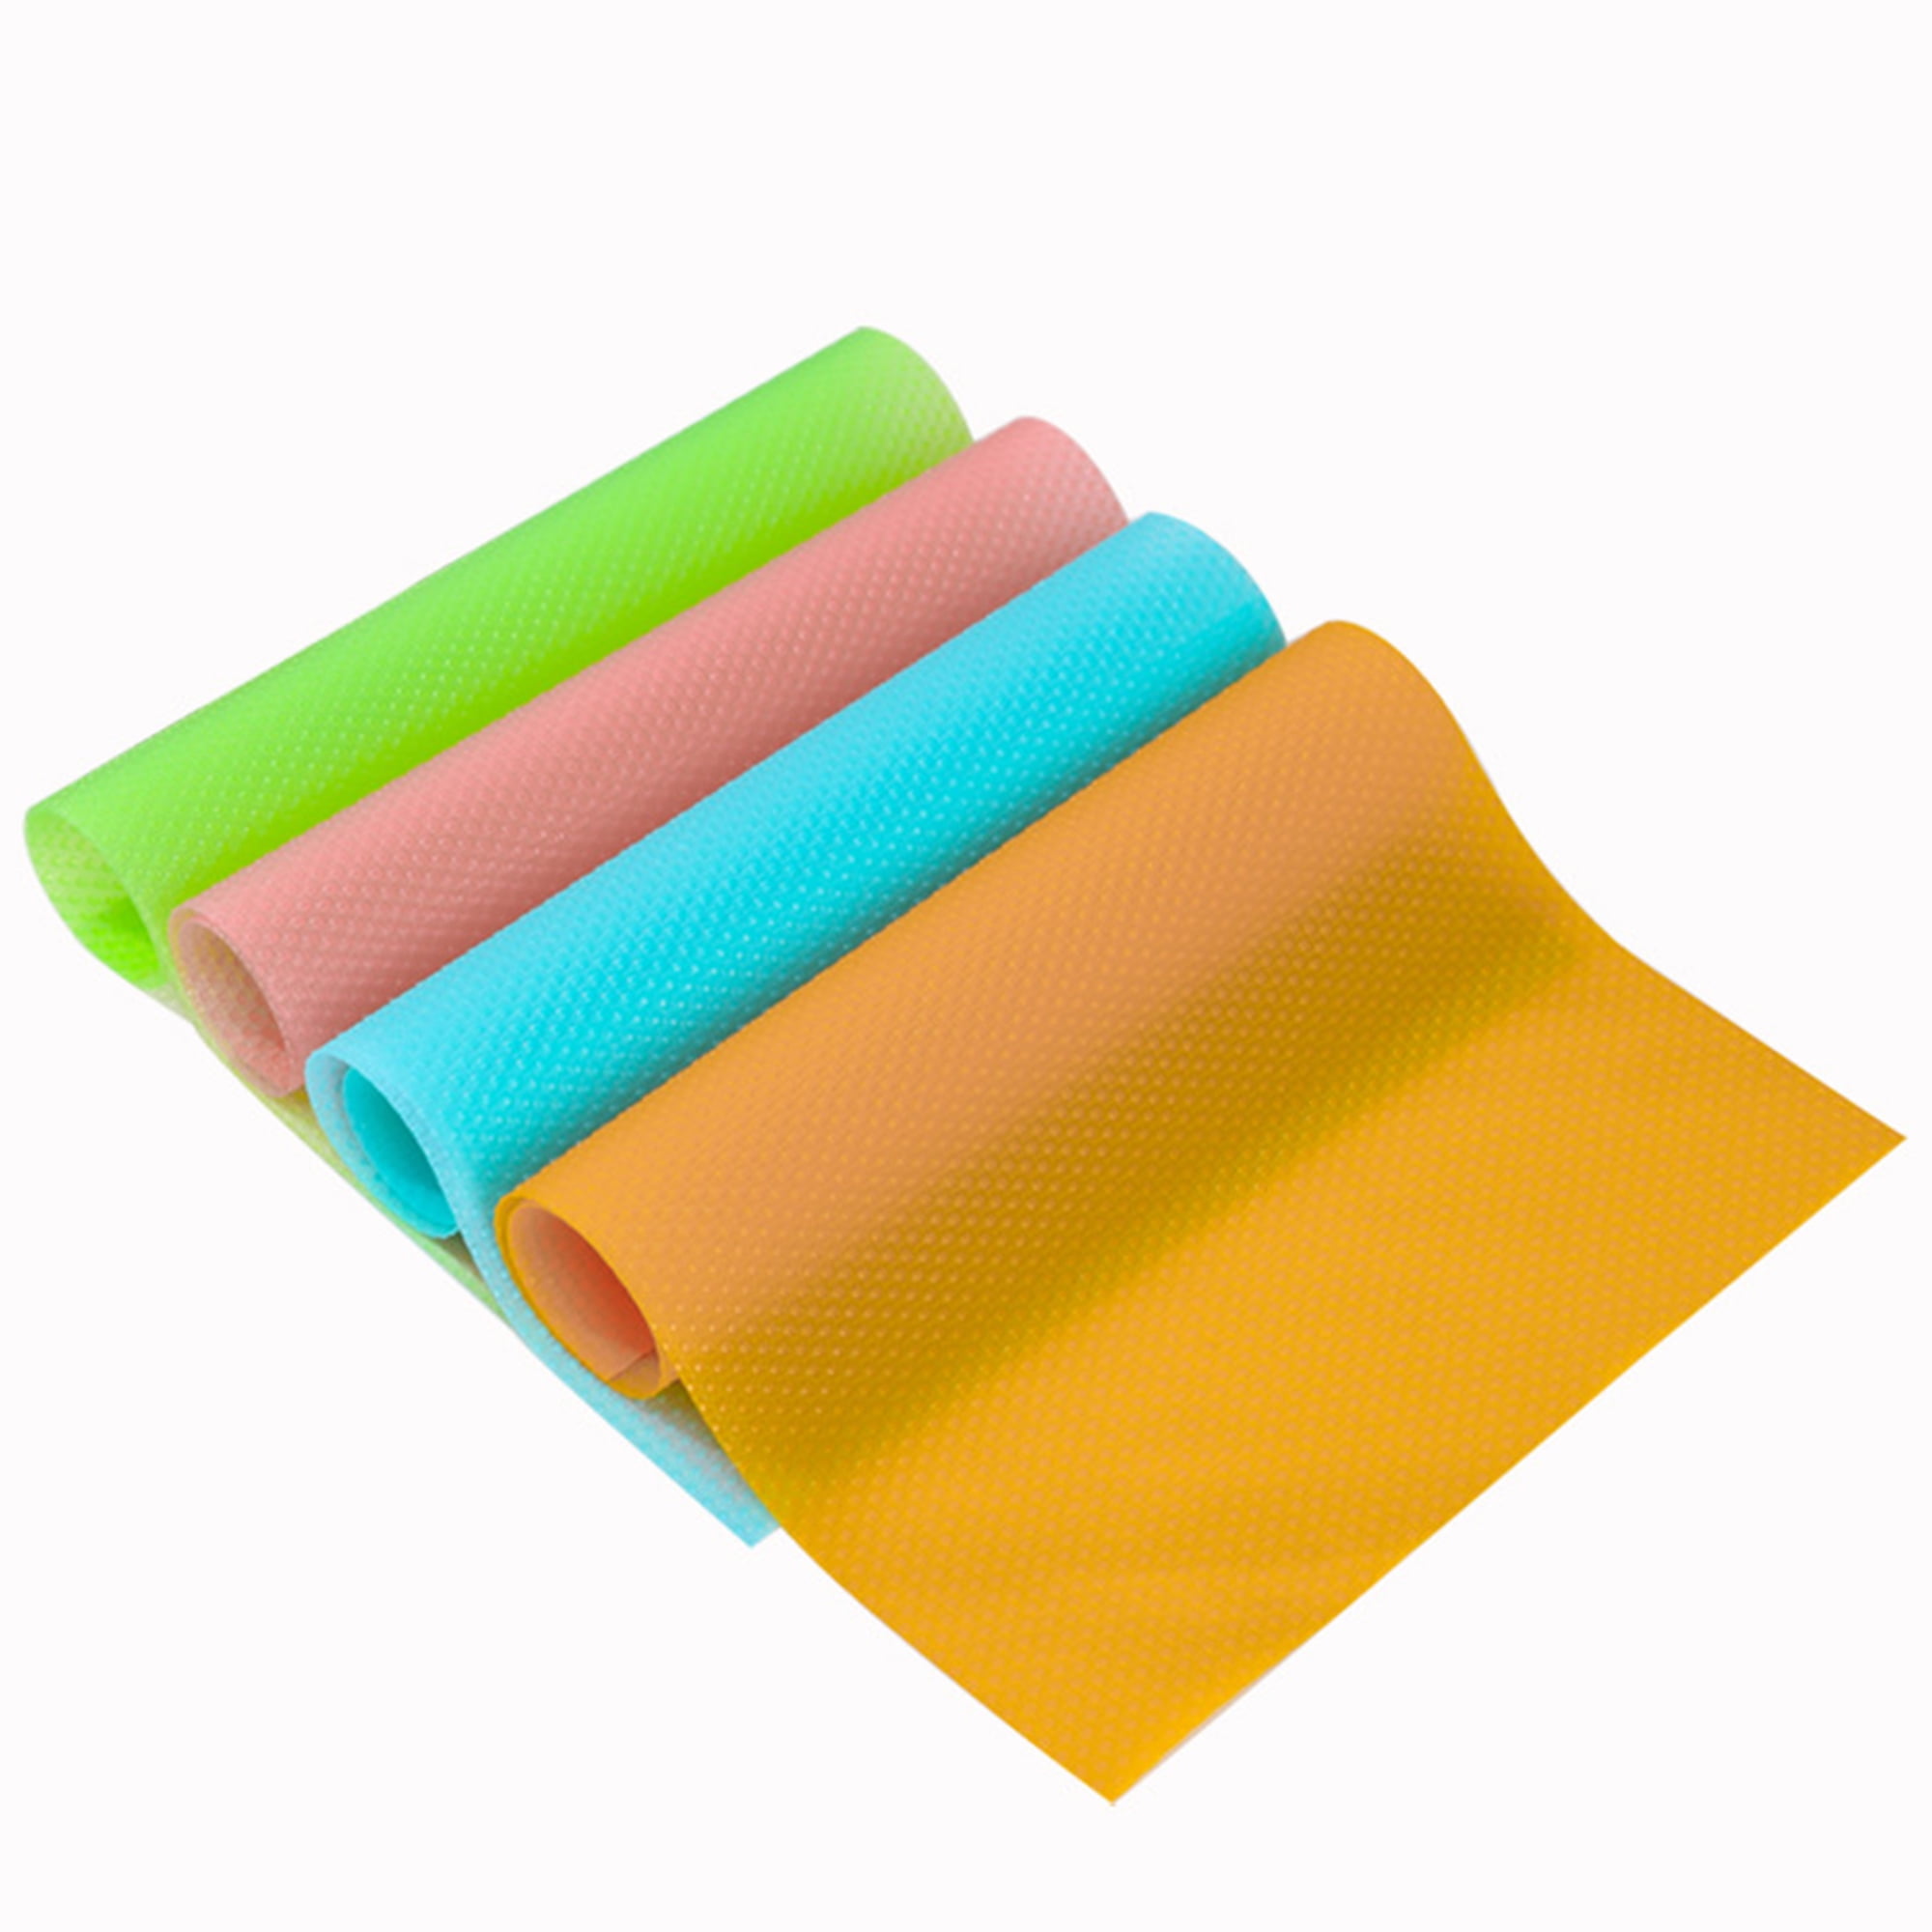 12 Pcs Refrigerator pad Antifouling Fridge Liners Non Slip Can Be Cut Drawers Mats for Kitchen Cabinet Refrigerator Cupboard Liners 3 Colors, 11.4x17.7 in 